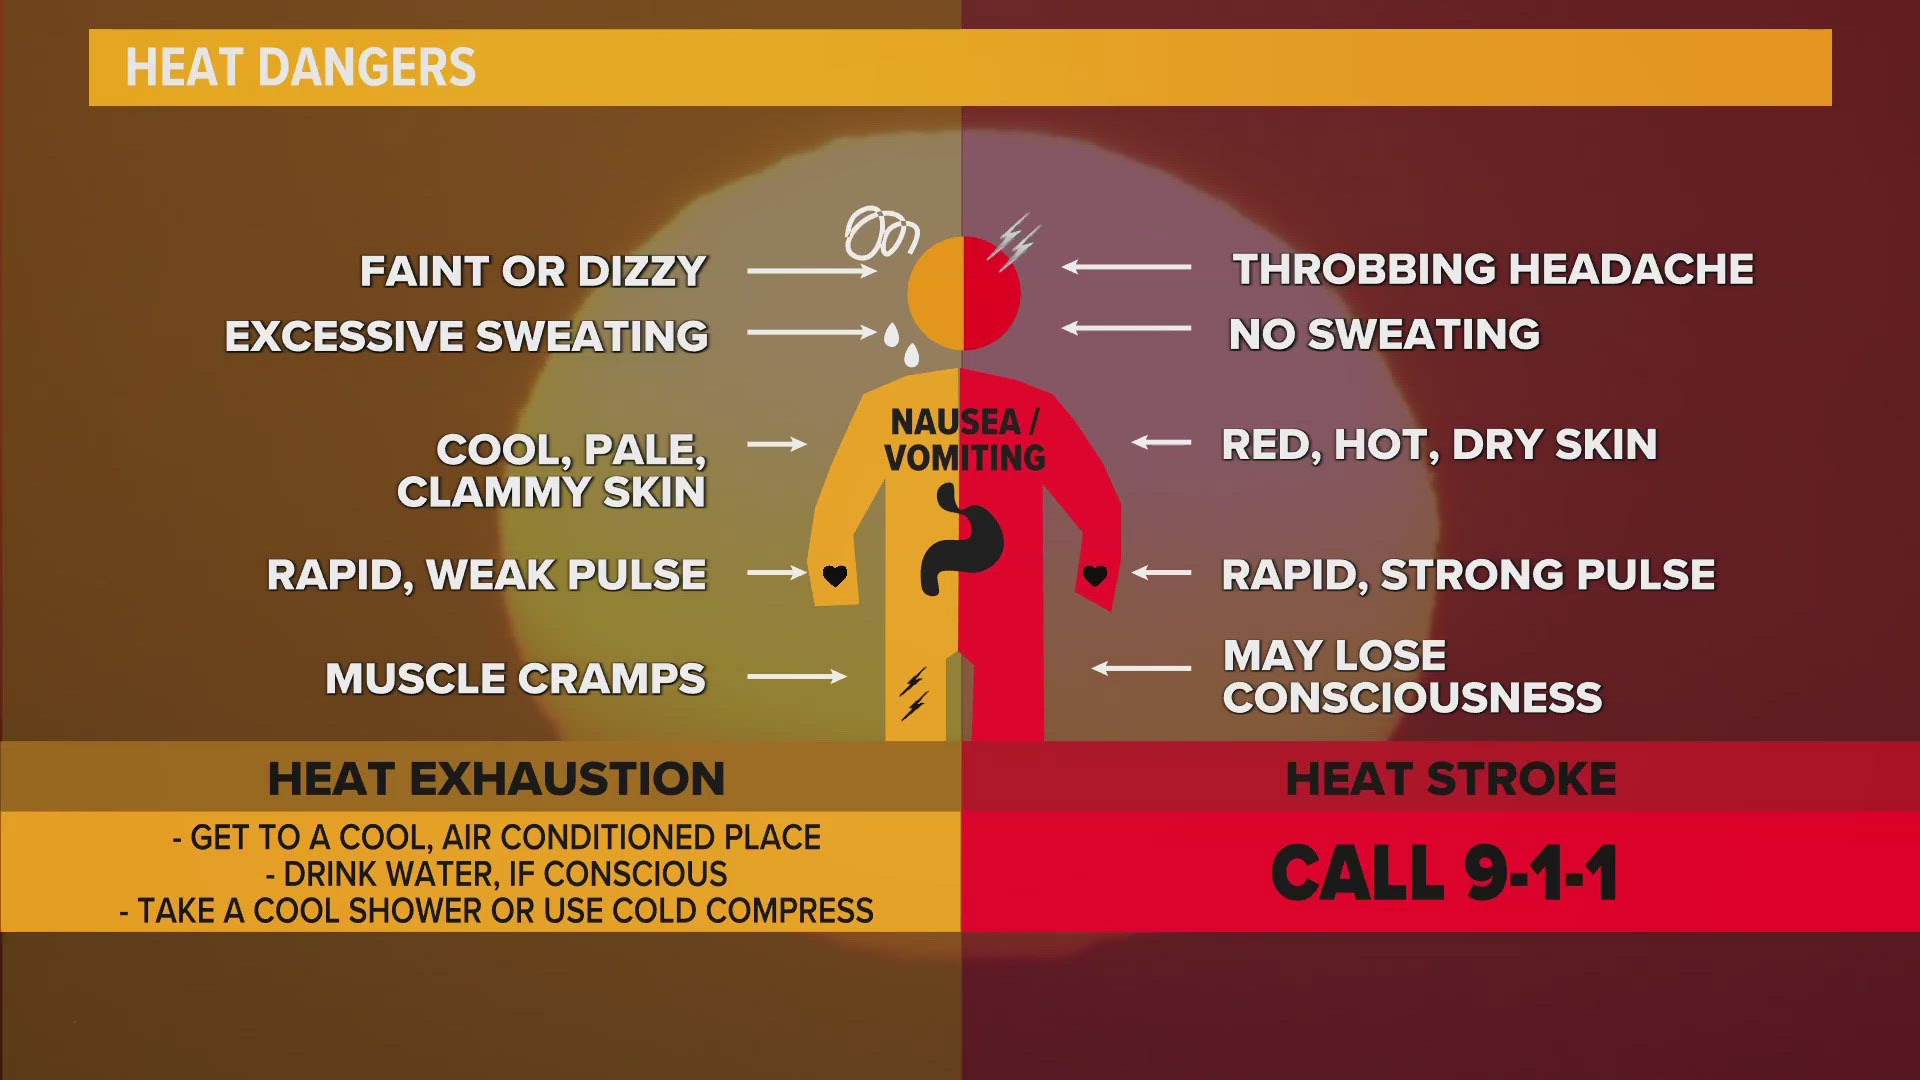 We're dedicated to keeping you safe this summer. Here's what you need to know about heat exhaustion and heat stroke.